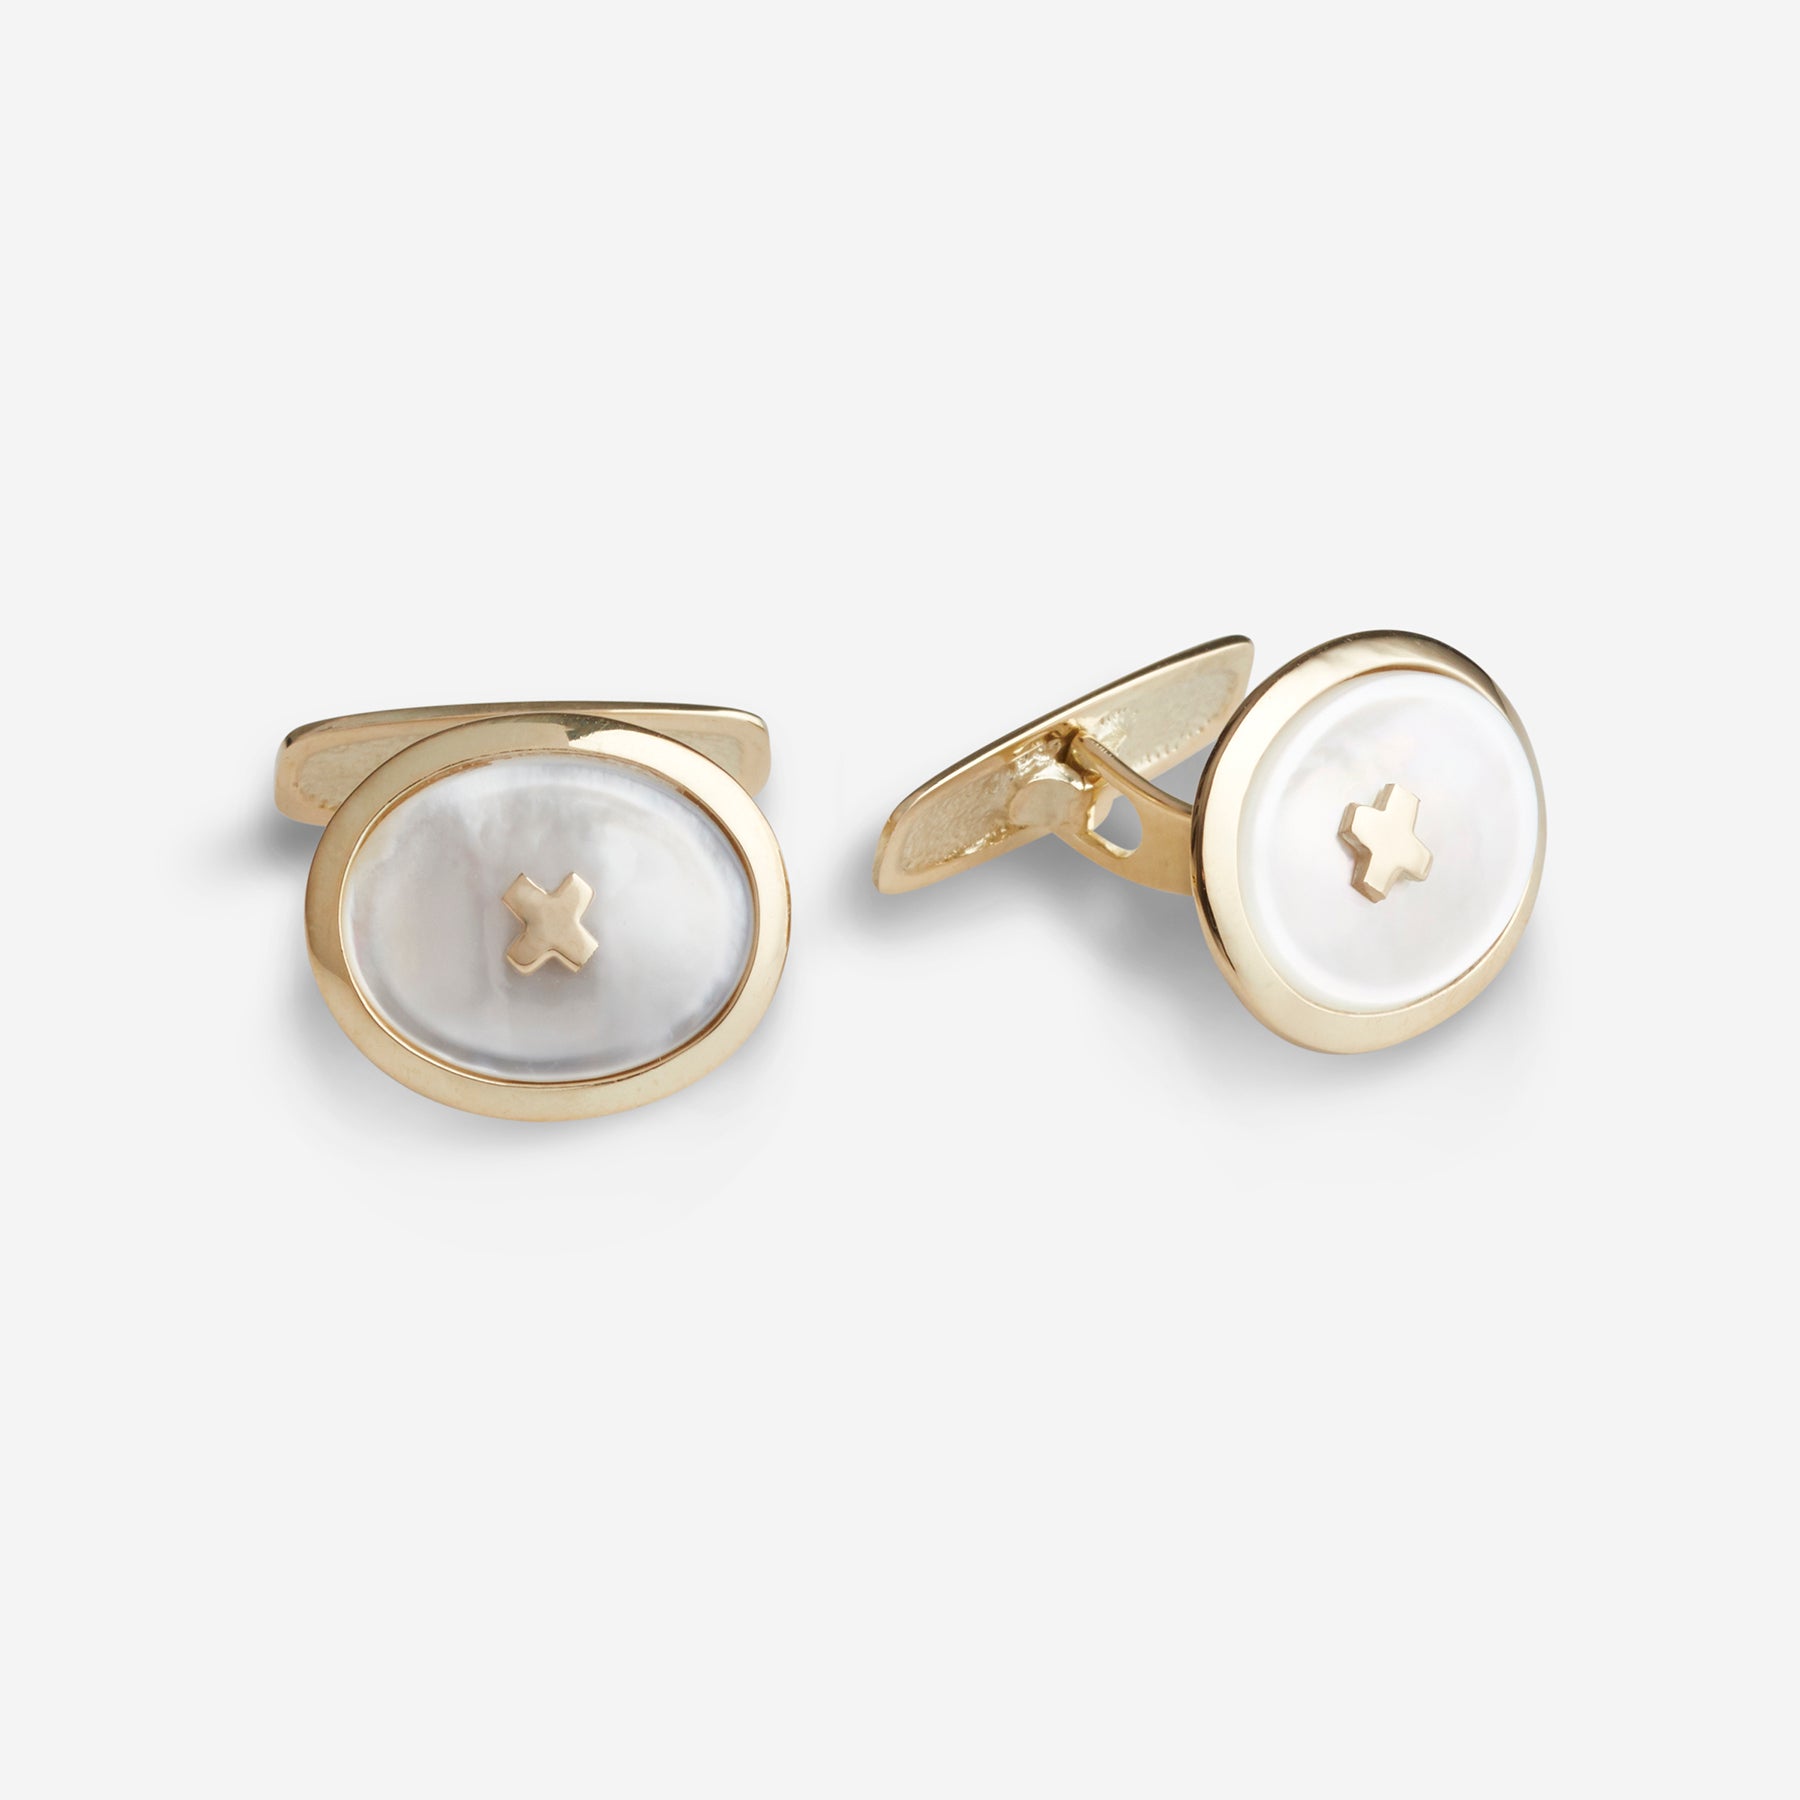 Oval mother-of-pearl cufflinks